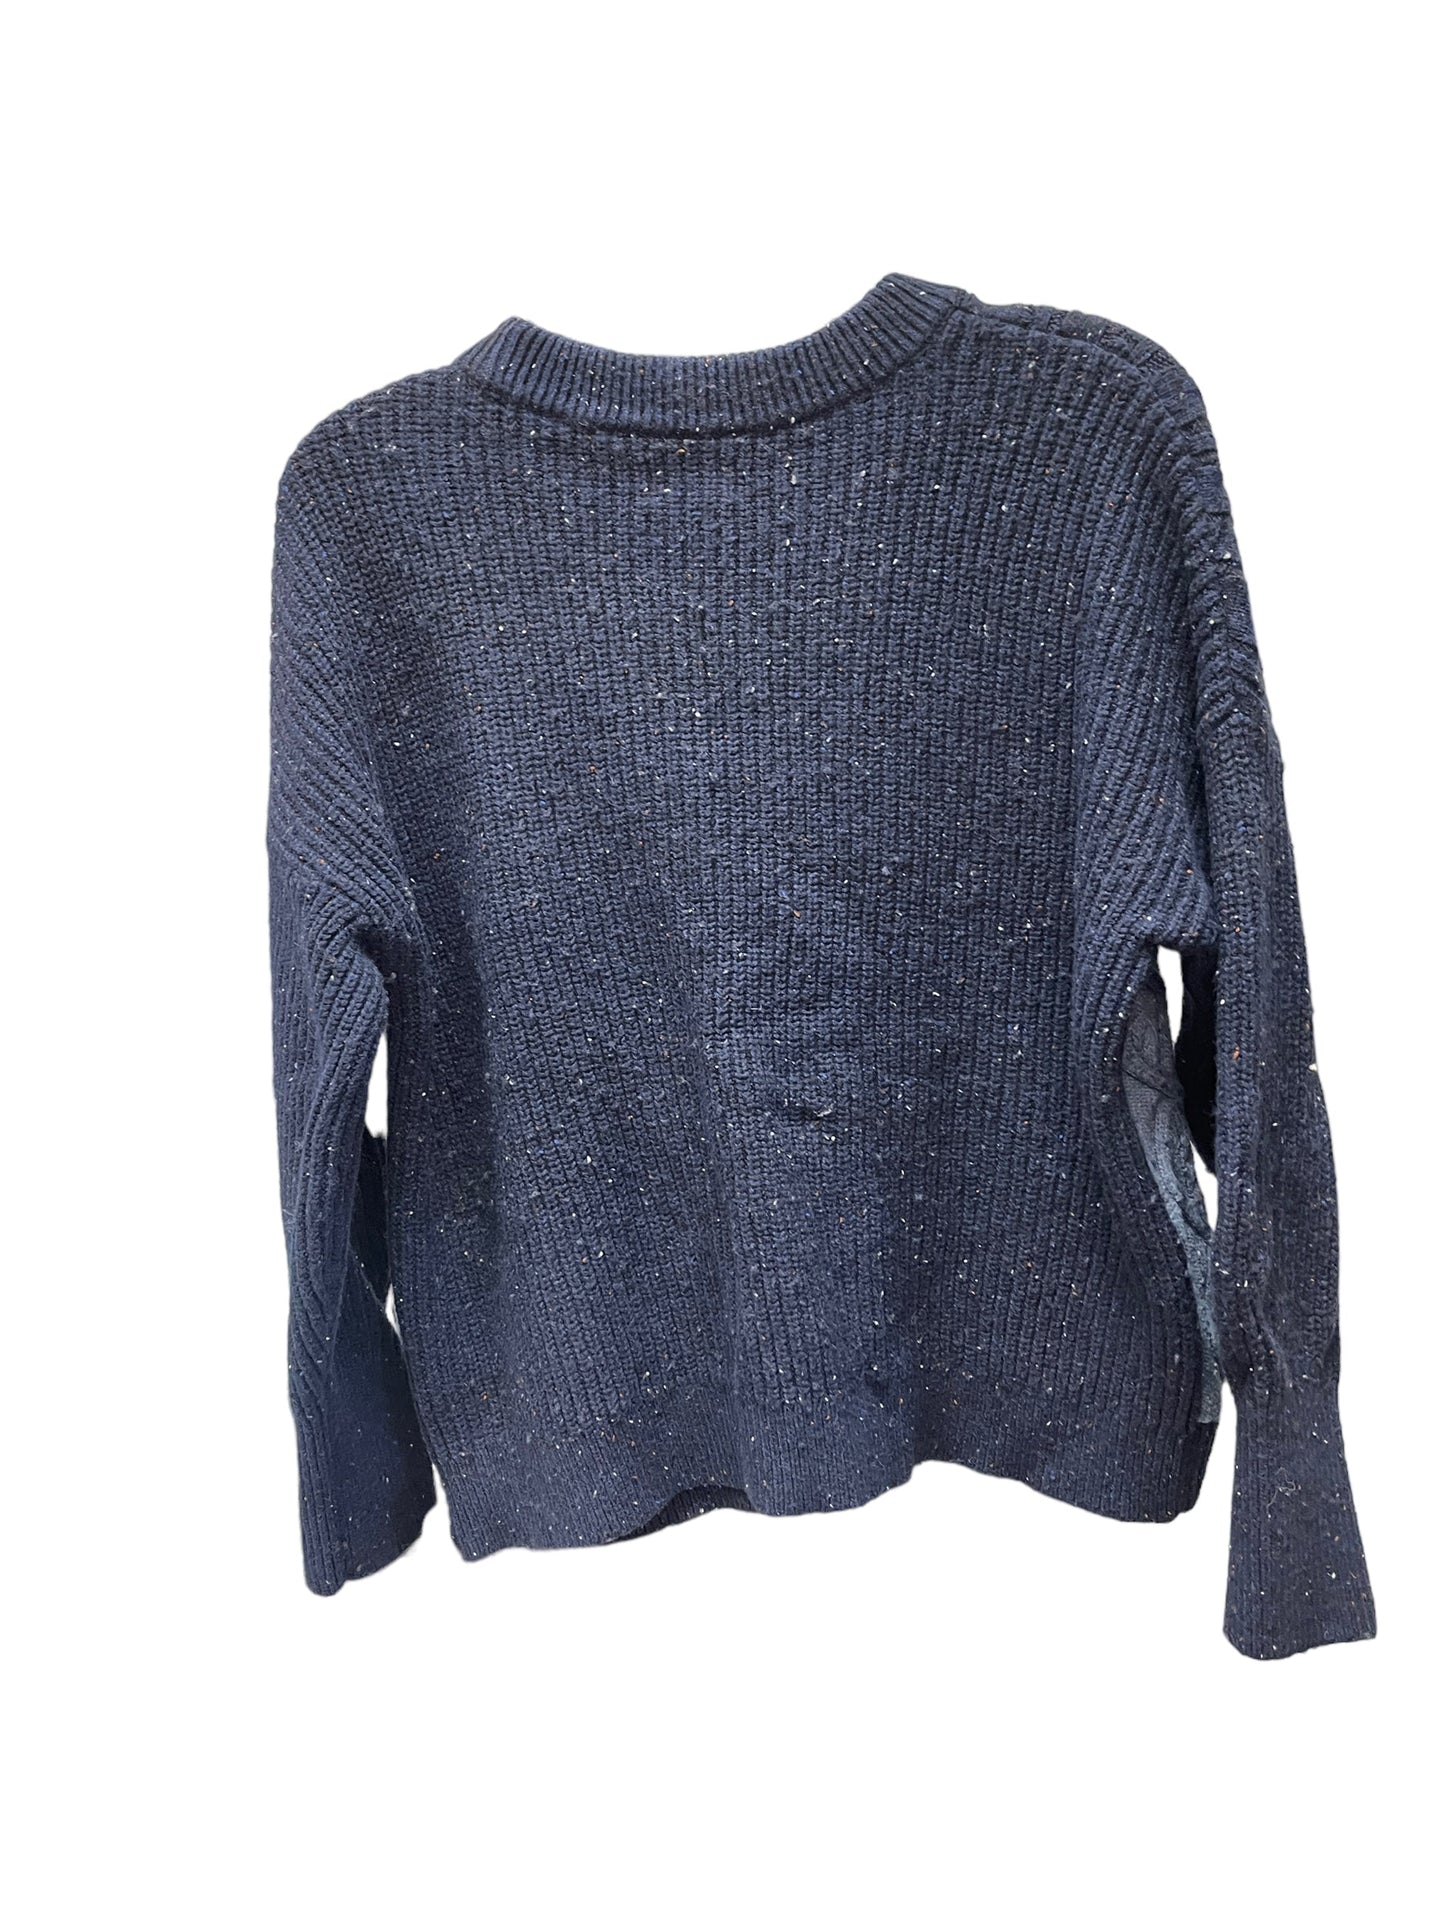 Sweater By Lands End  Size: Xs